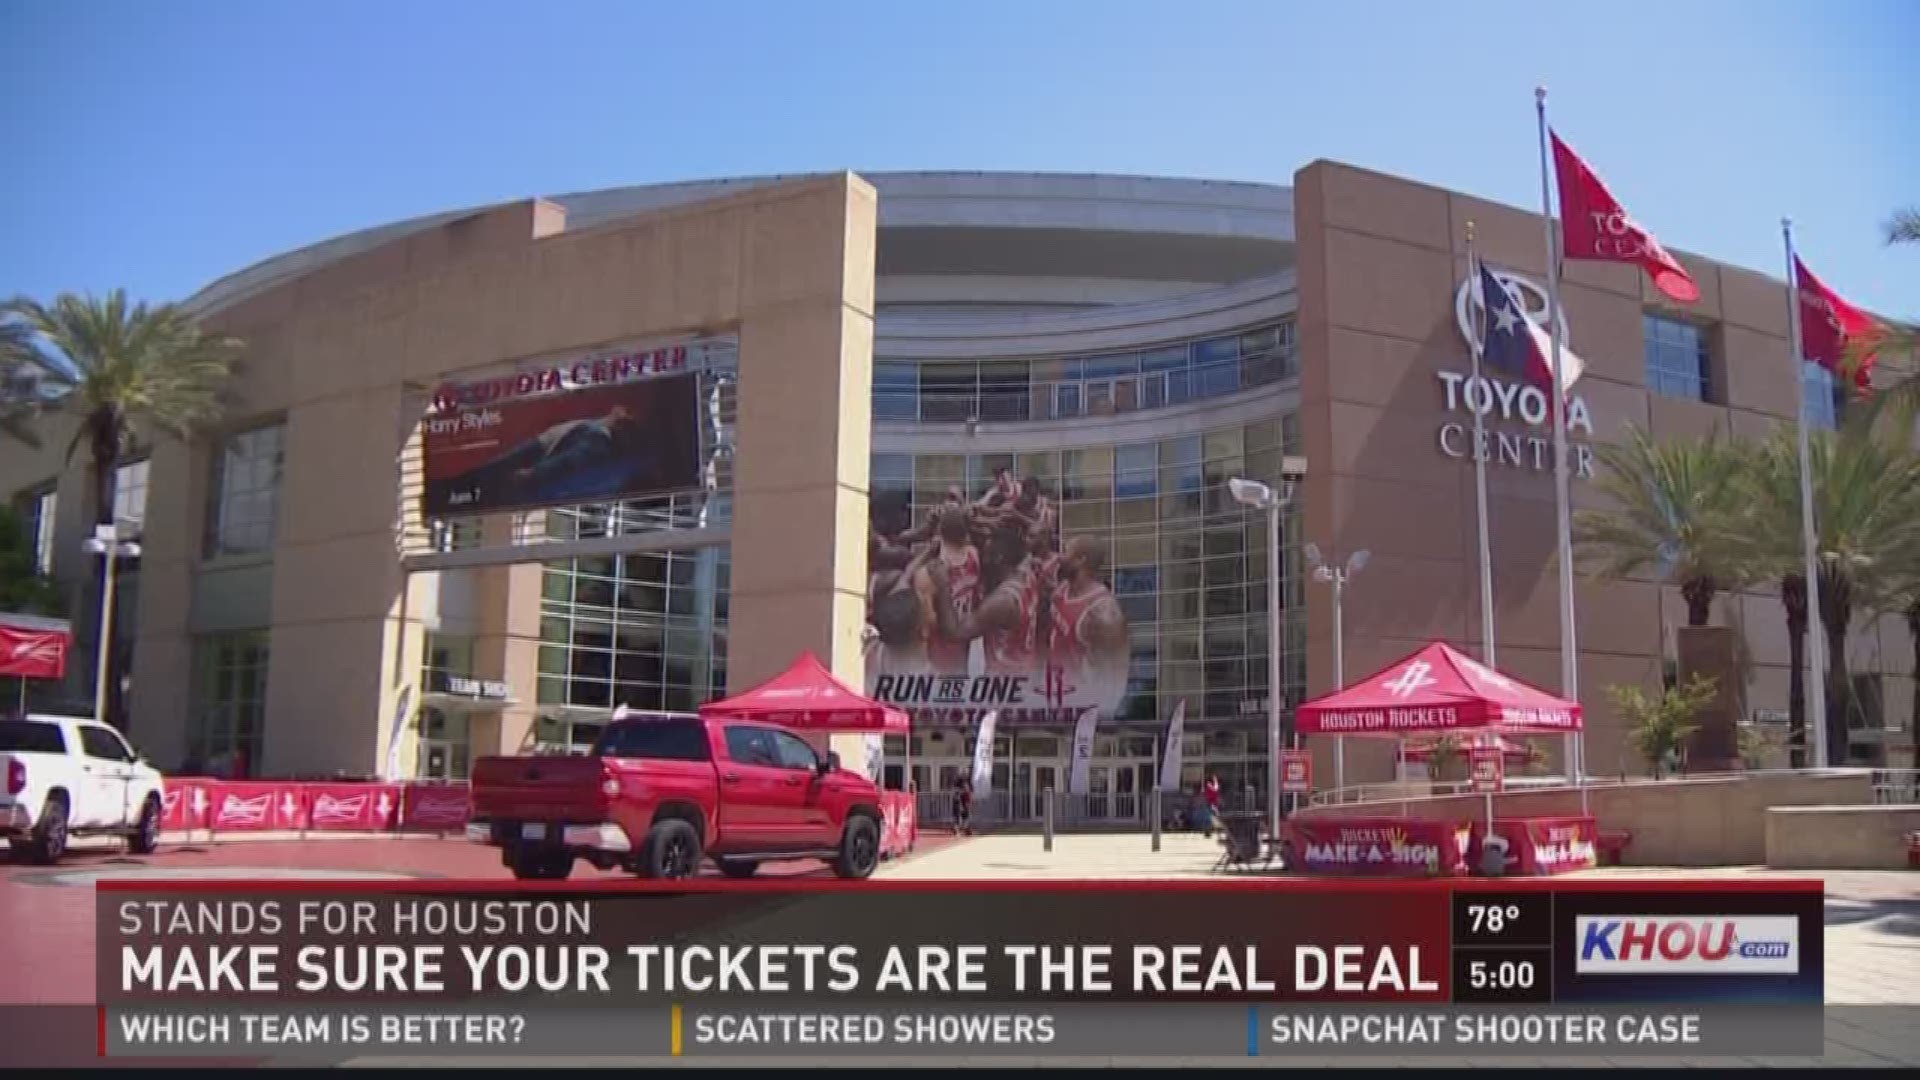 Before you buy your Rockets playoff tickets, listen to some advice from KHOU 11's Melissa Correa.